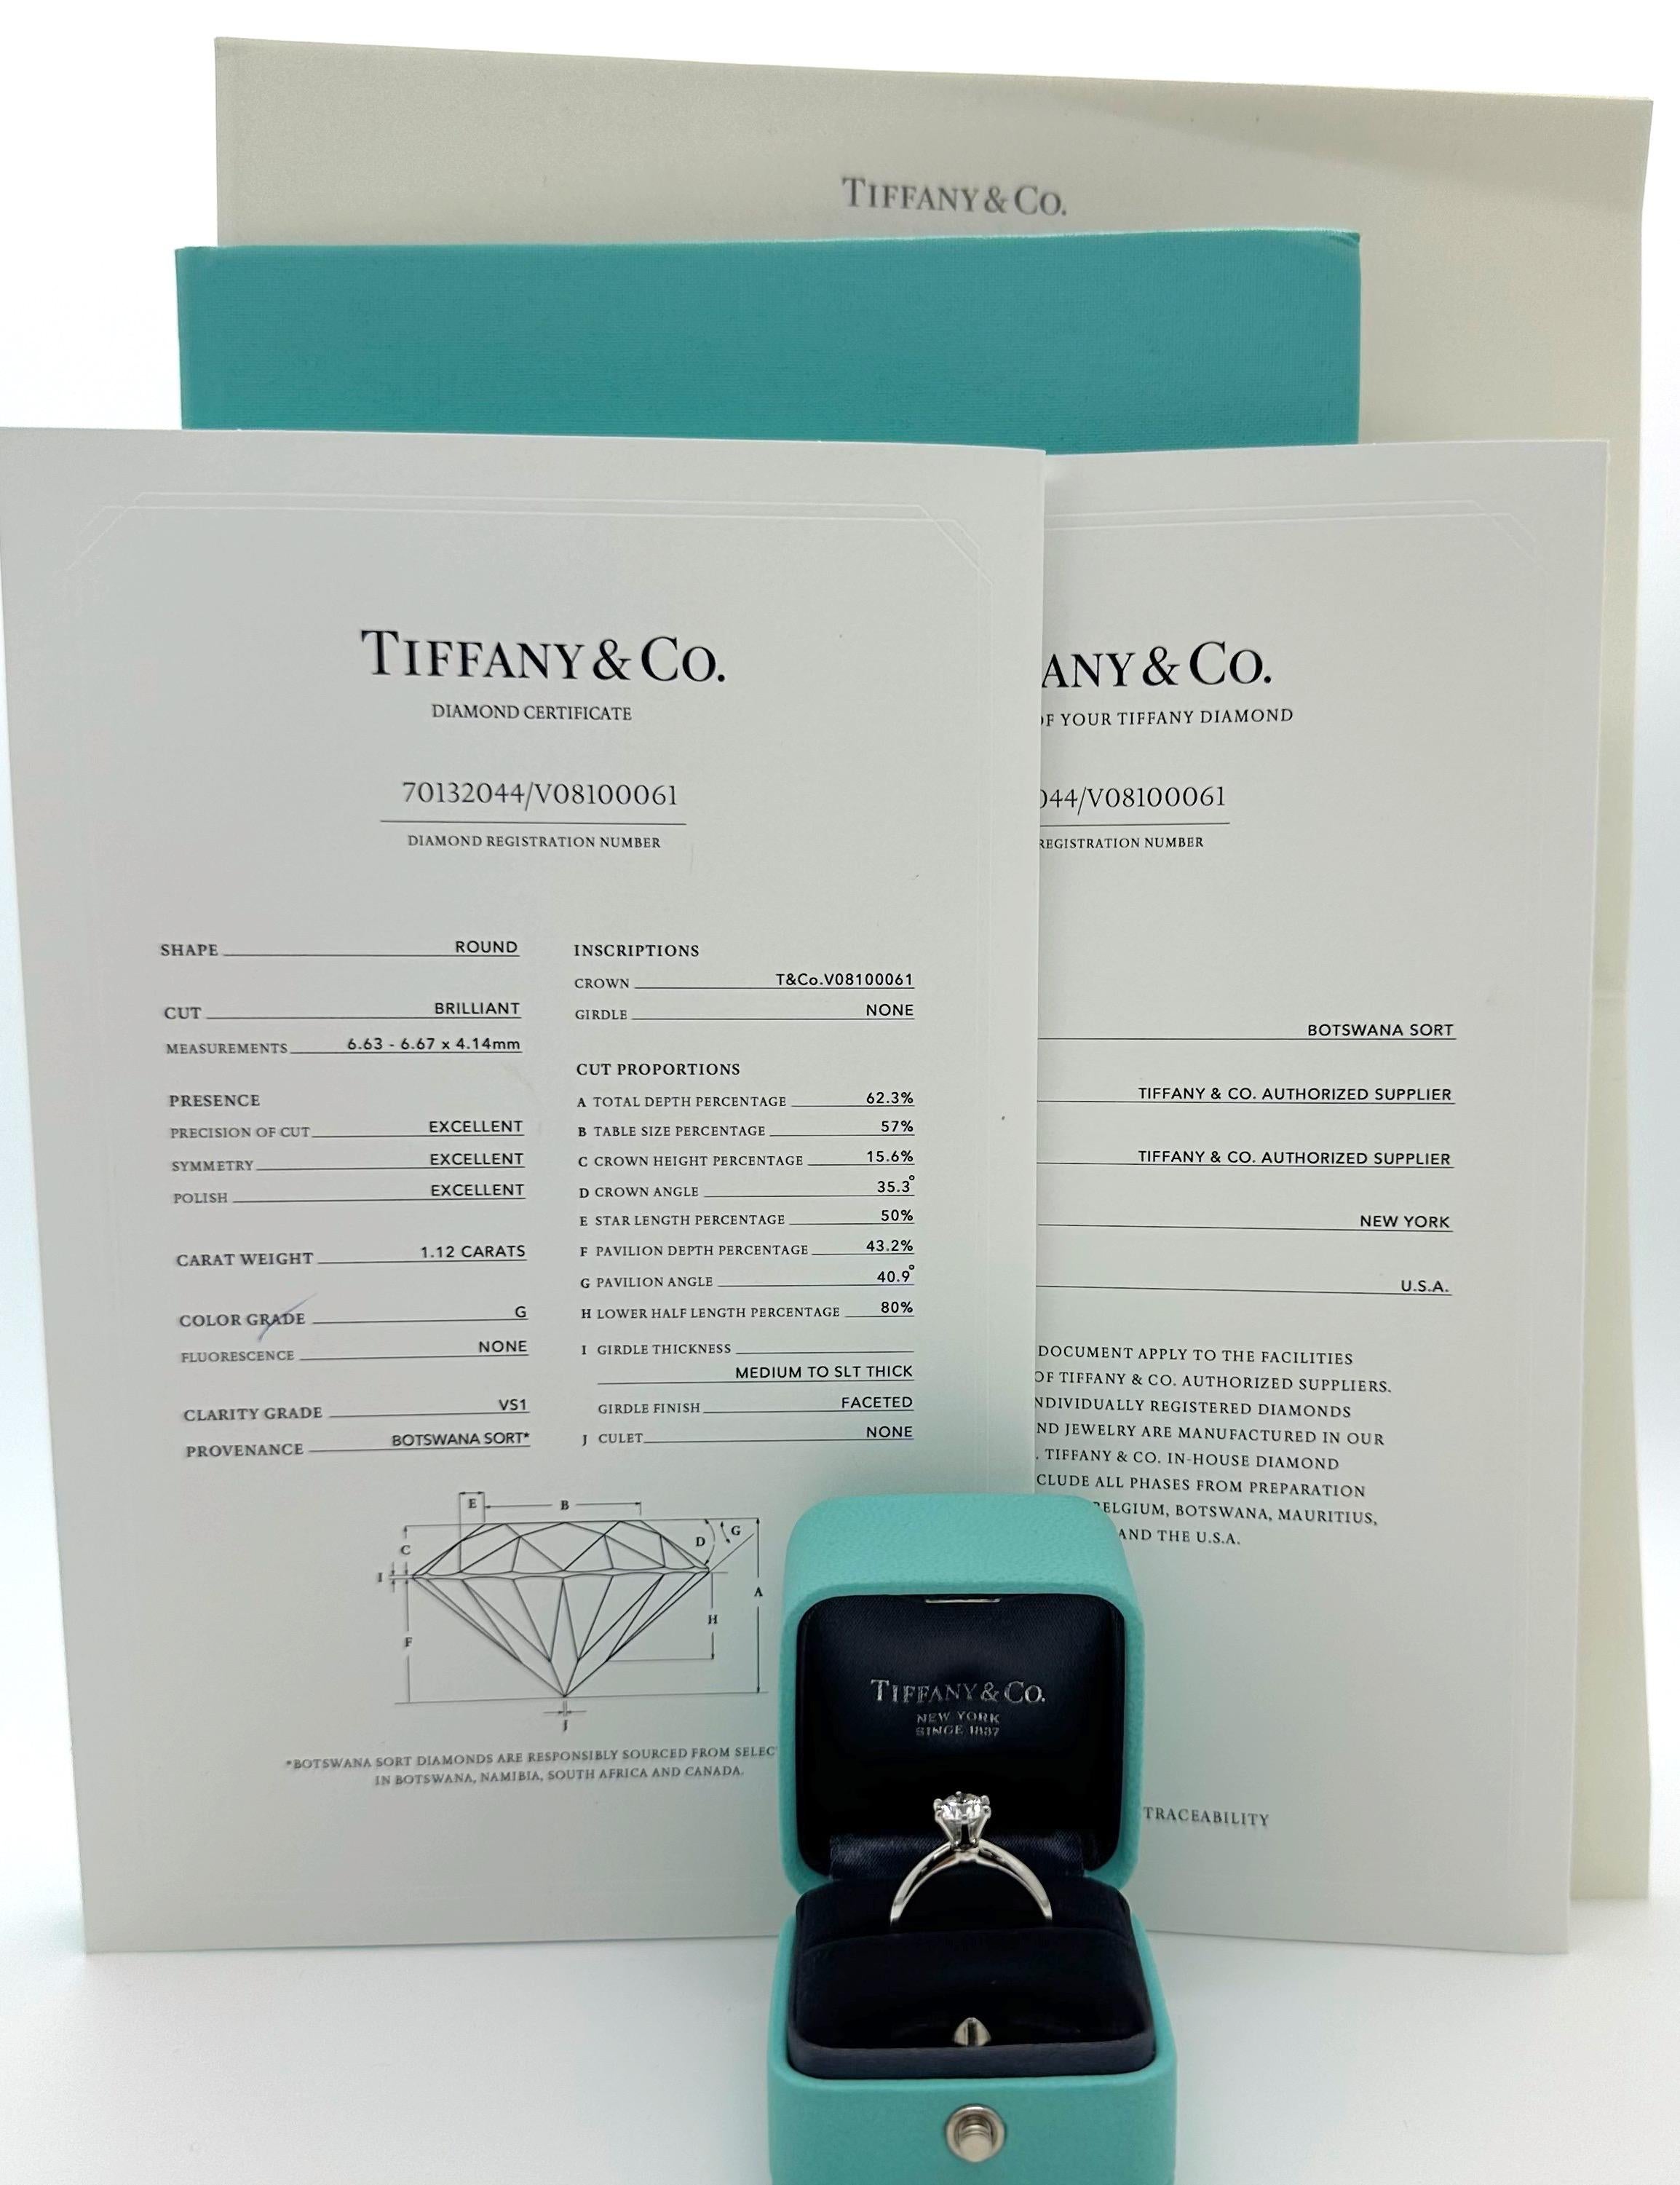 Tiffany & Co. Tiffany Setting Round Diamond Engagement Ring 
Style:  6- Prong Solitaire
Ref. number:  171/21/70132044
Metal:  Platinum Pt950
Size / Measurements:  5.5 sizable
TCW:  1.12 tcw
Main Diamond:  Round Brilliant Diamond 1.12 cts
Color &